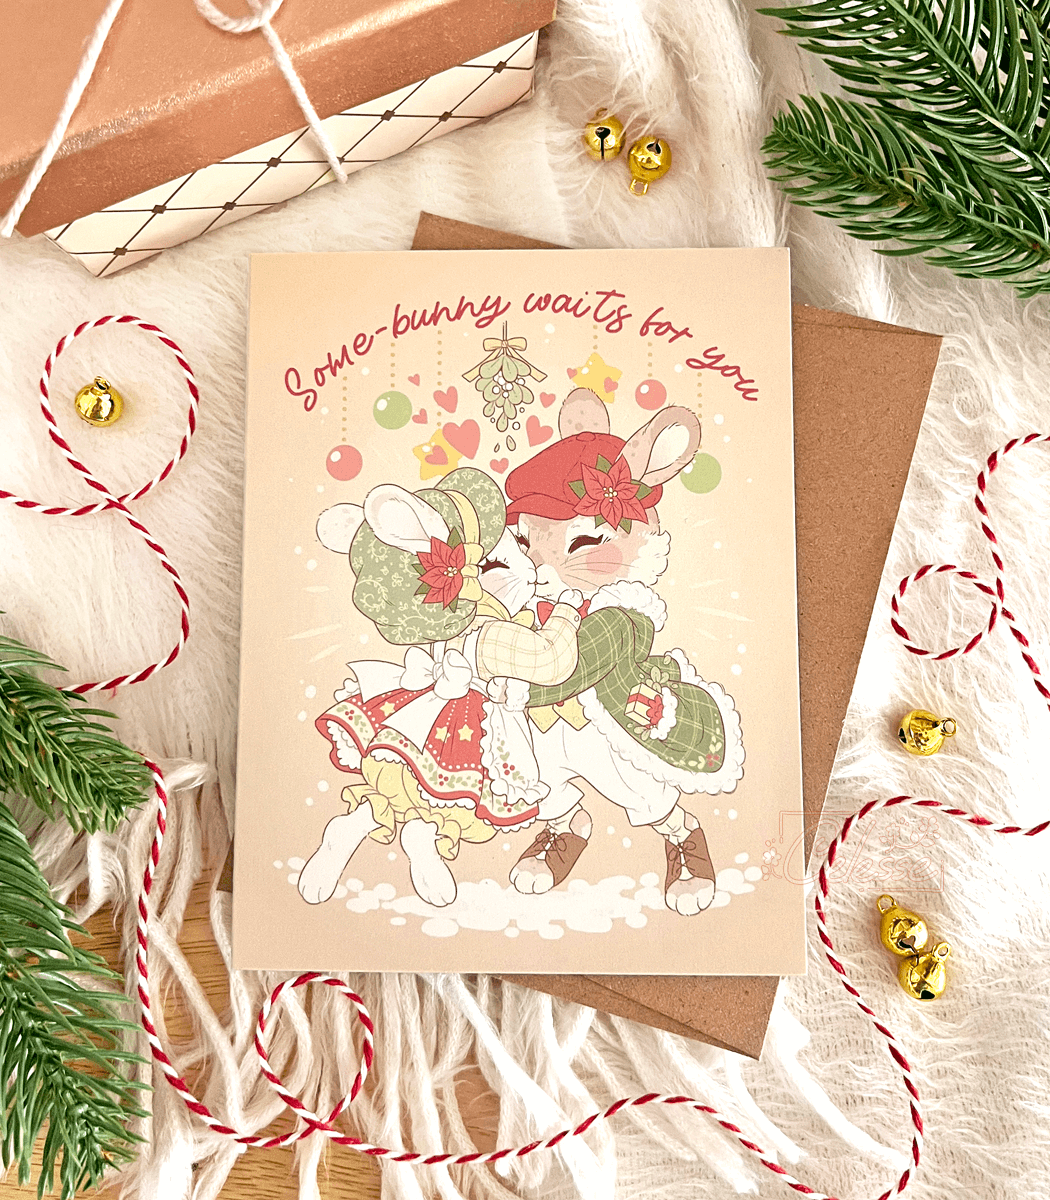 Thank you for the love on my new greeting cards! I've always wanted to do more of them so I'm excited for even more in the future 🥰💖 